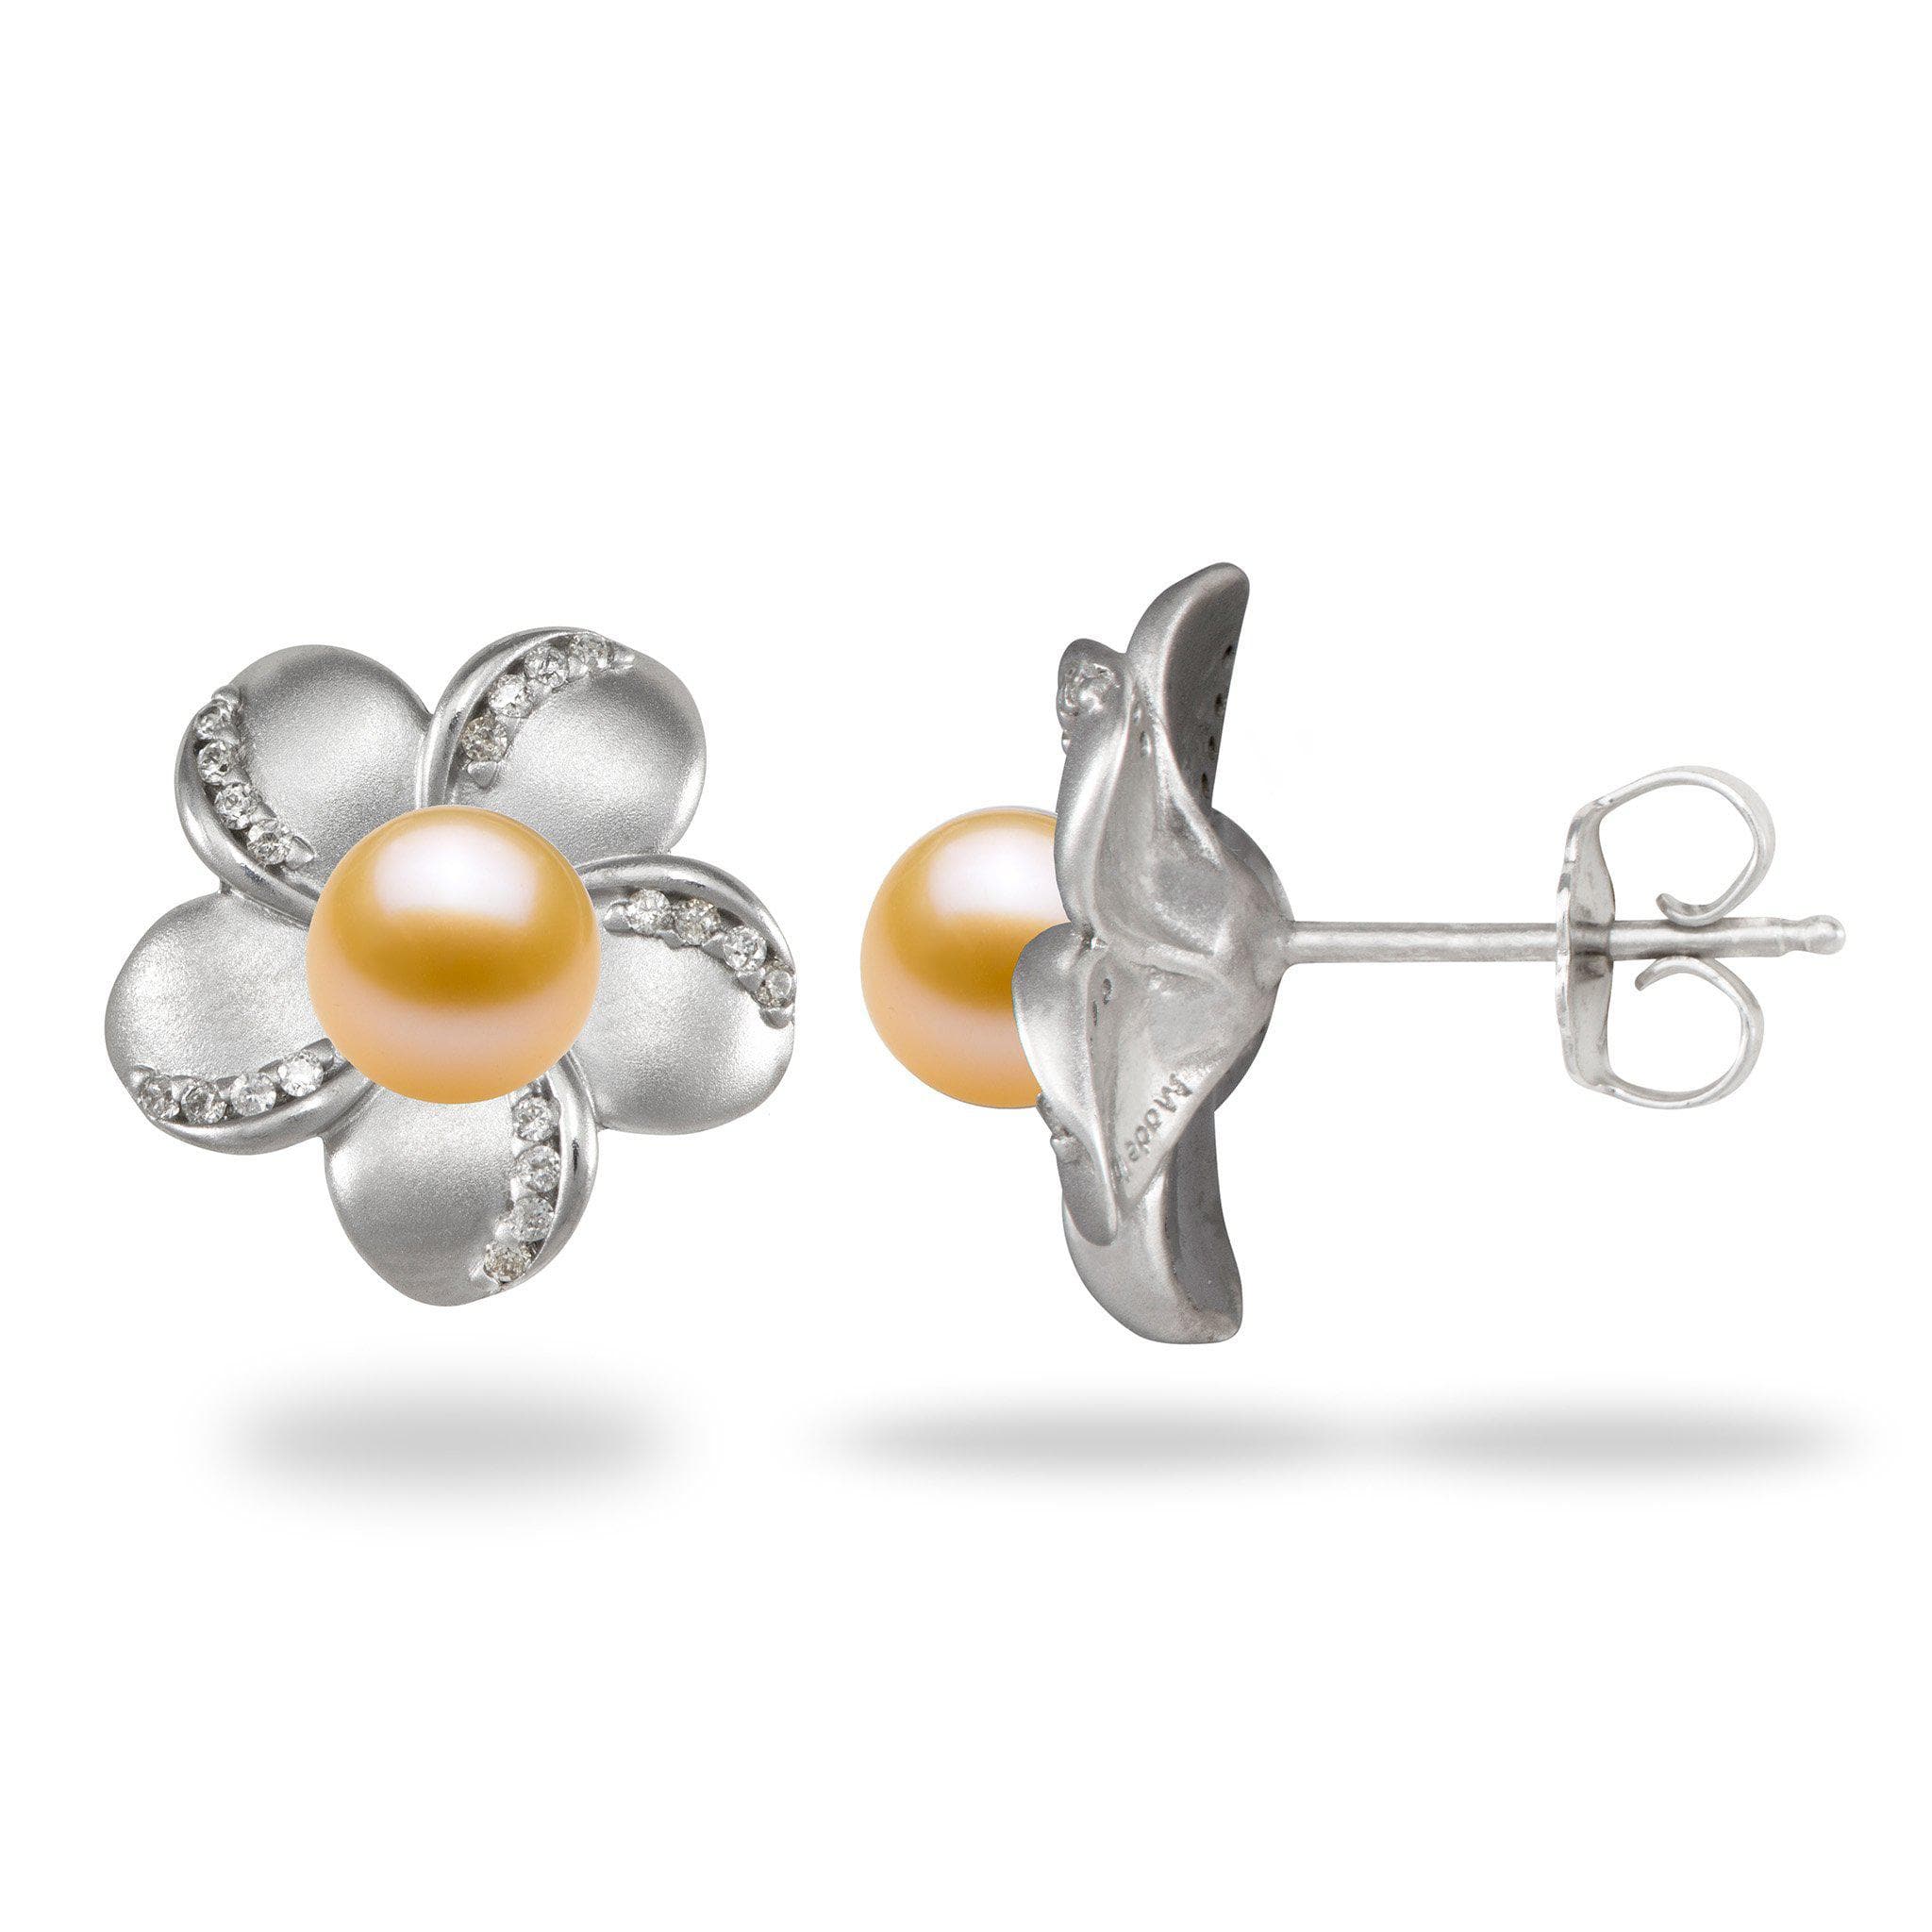 Plumeria (15mm) Earrings Mounting in Sterling Silver with Peach Pearl - Maui Divers Jewelry